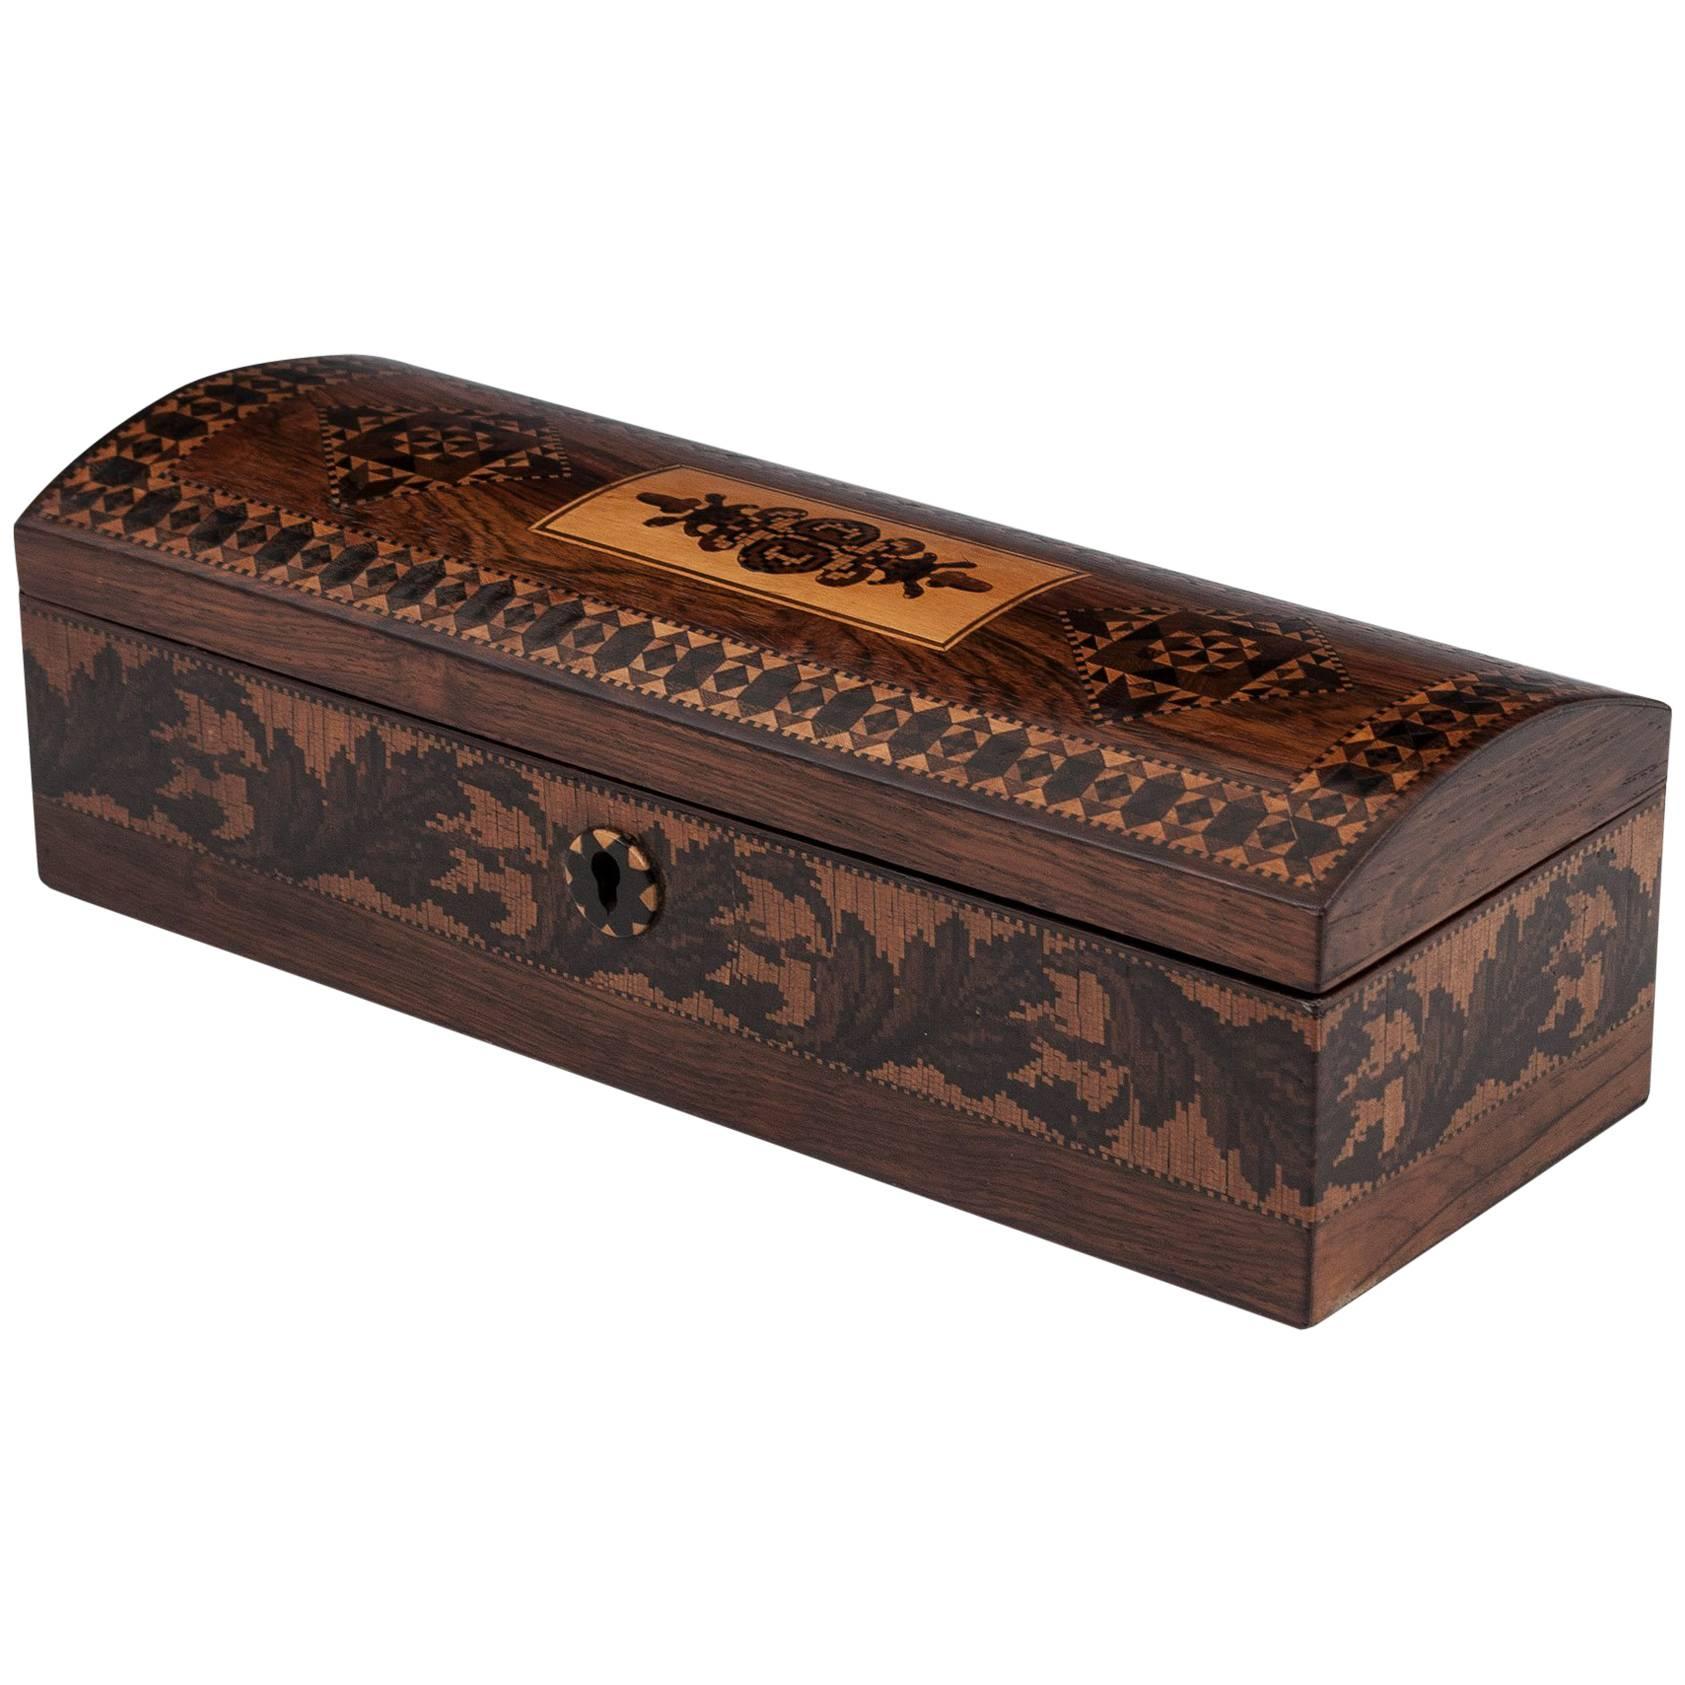 Tunbridge Ware Antique Glove Box with Floral Band, 19th Century